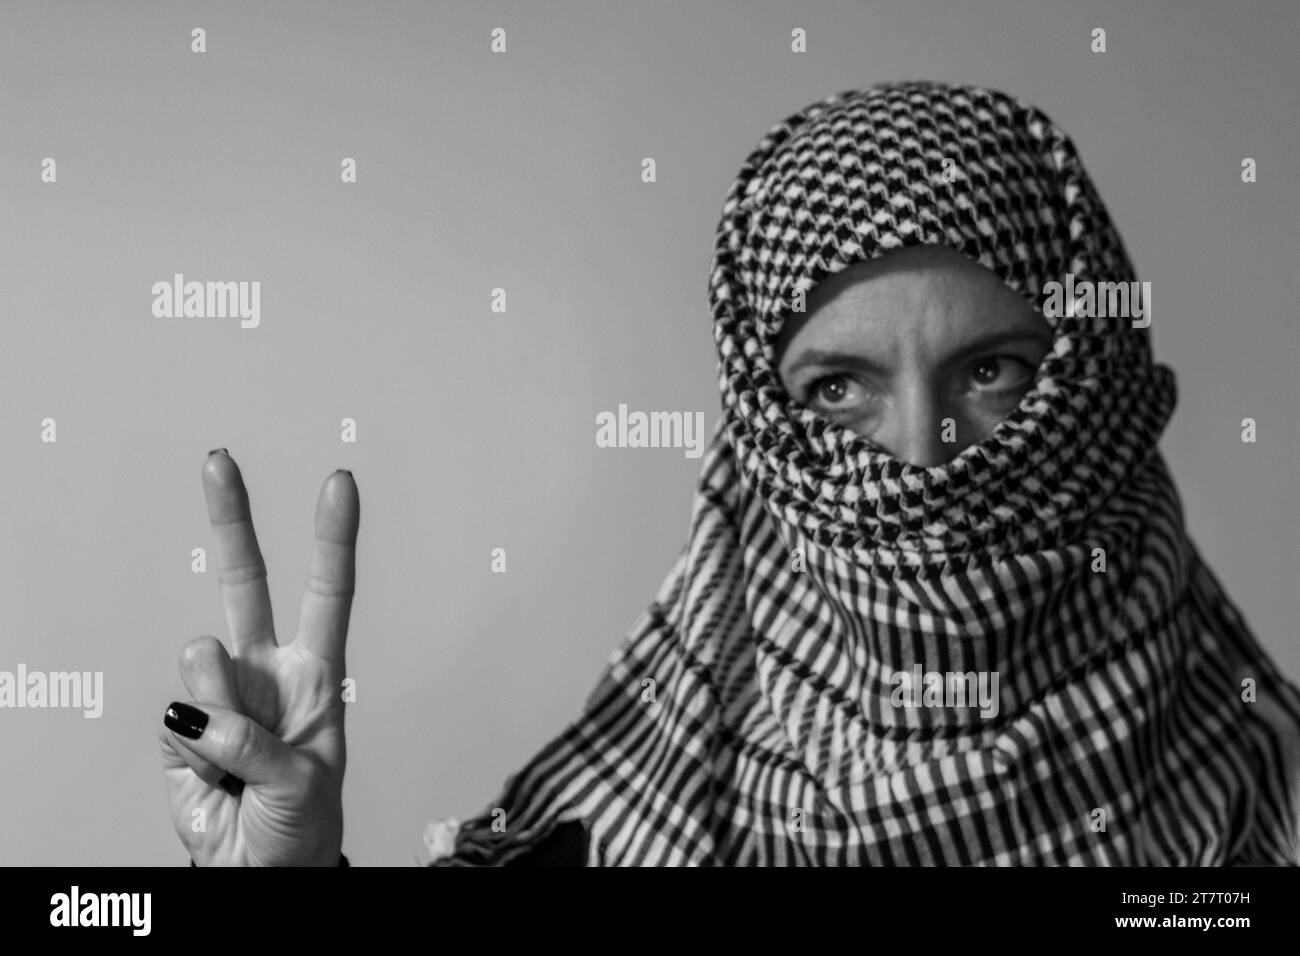 Green-eyed woman wearing a Palestinian scarf. Conflict concept Stock Photo